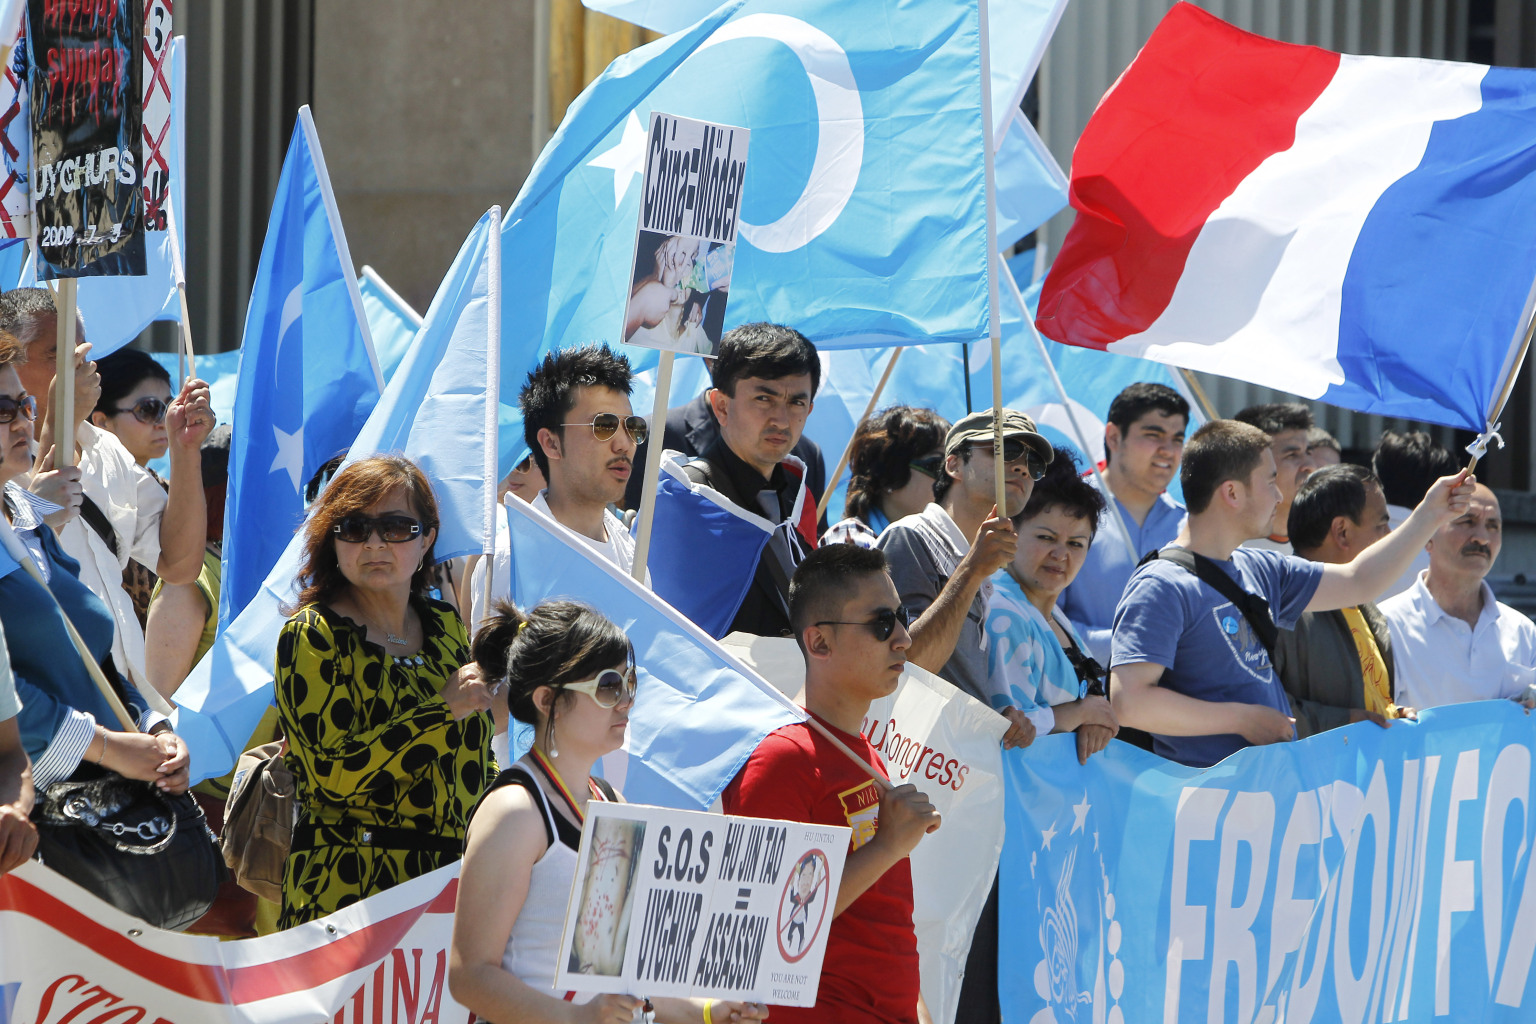 Chinese Police Are Demanding Personal Information From Uighurs in France